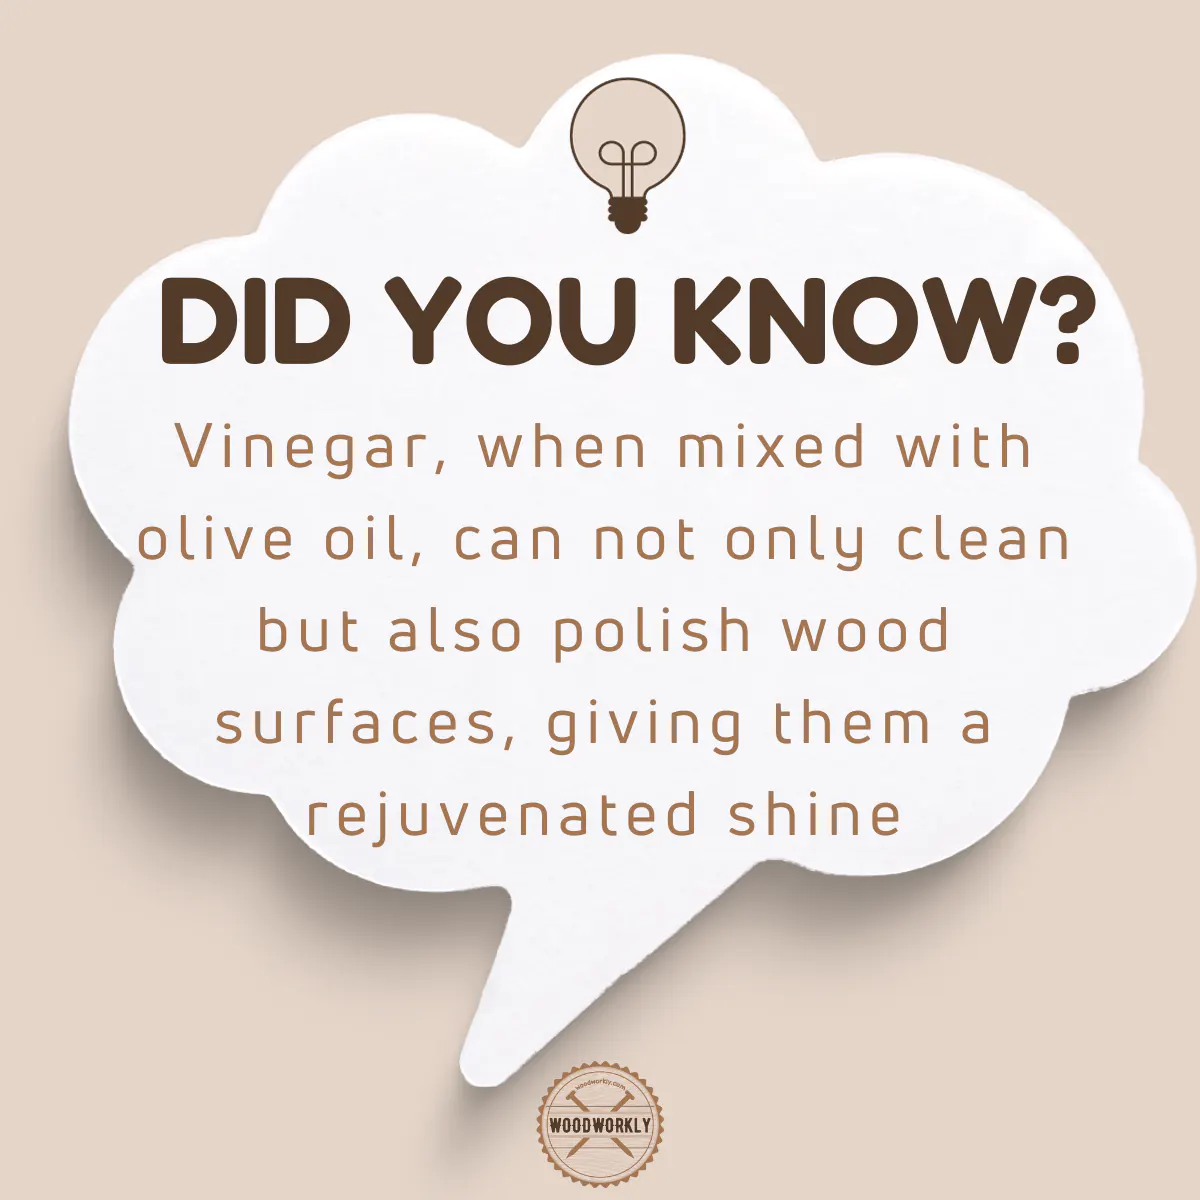 Did you know fact about vinegar on wood